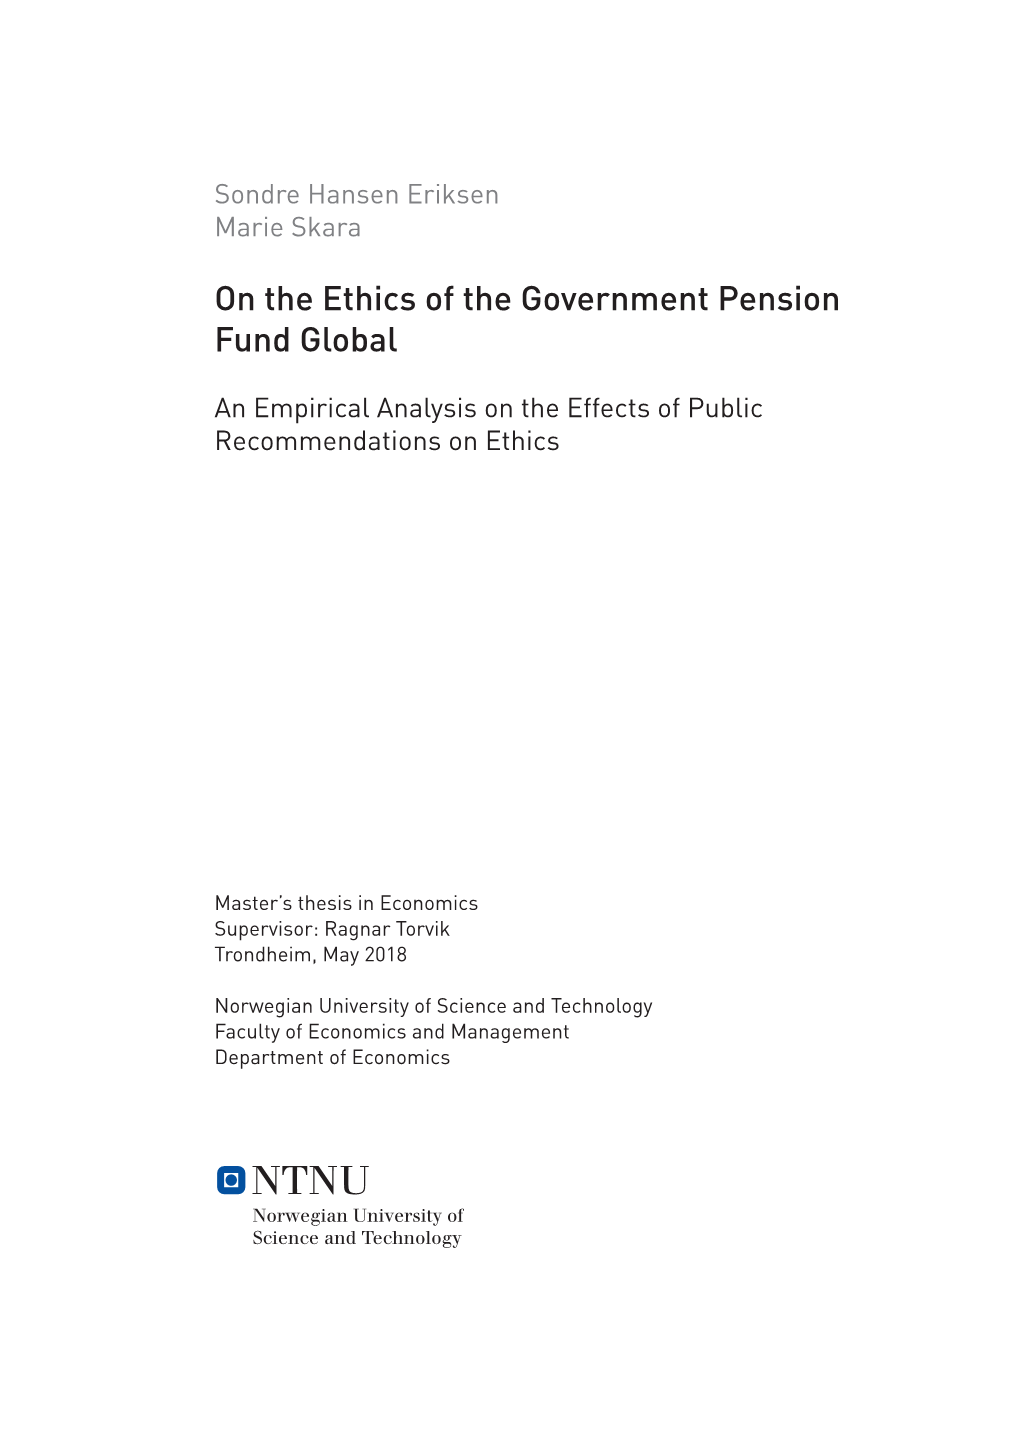 On the Ethics of the Government Pension Fund Global